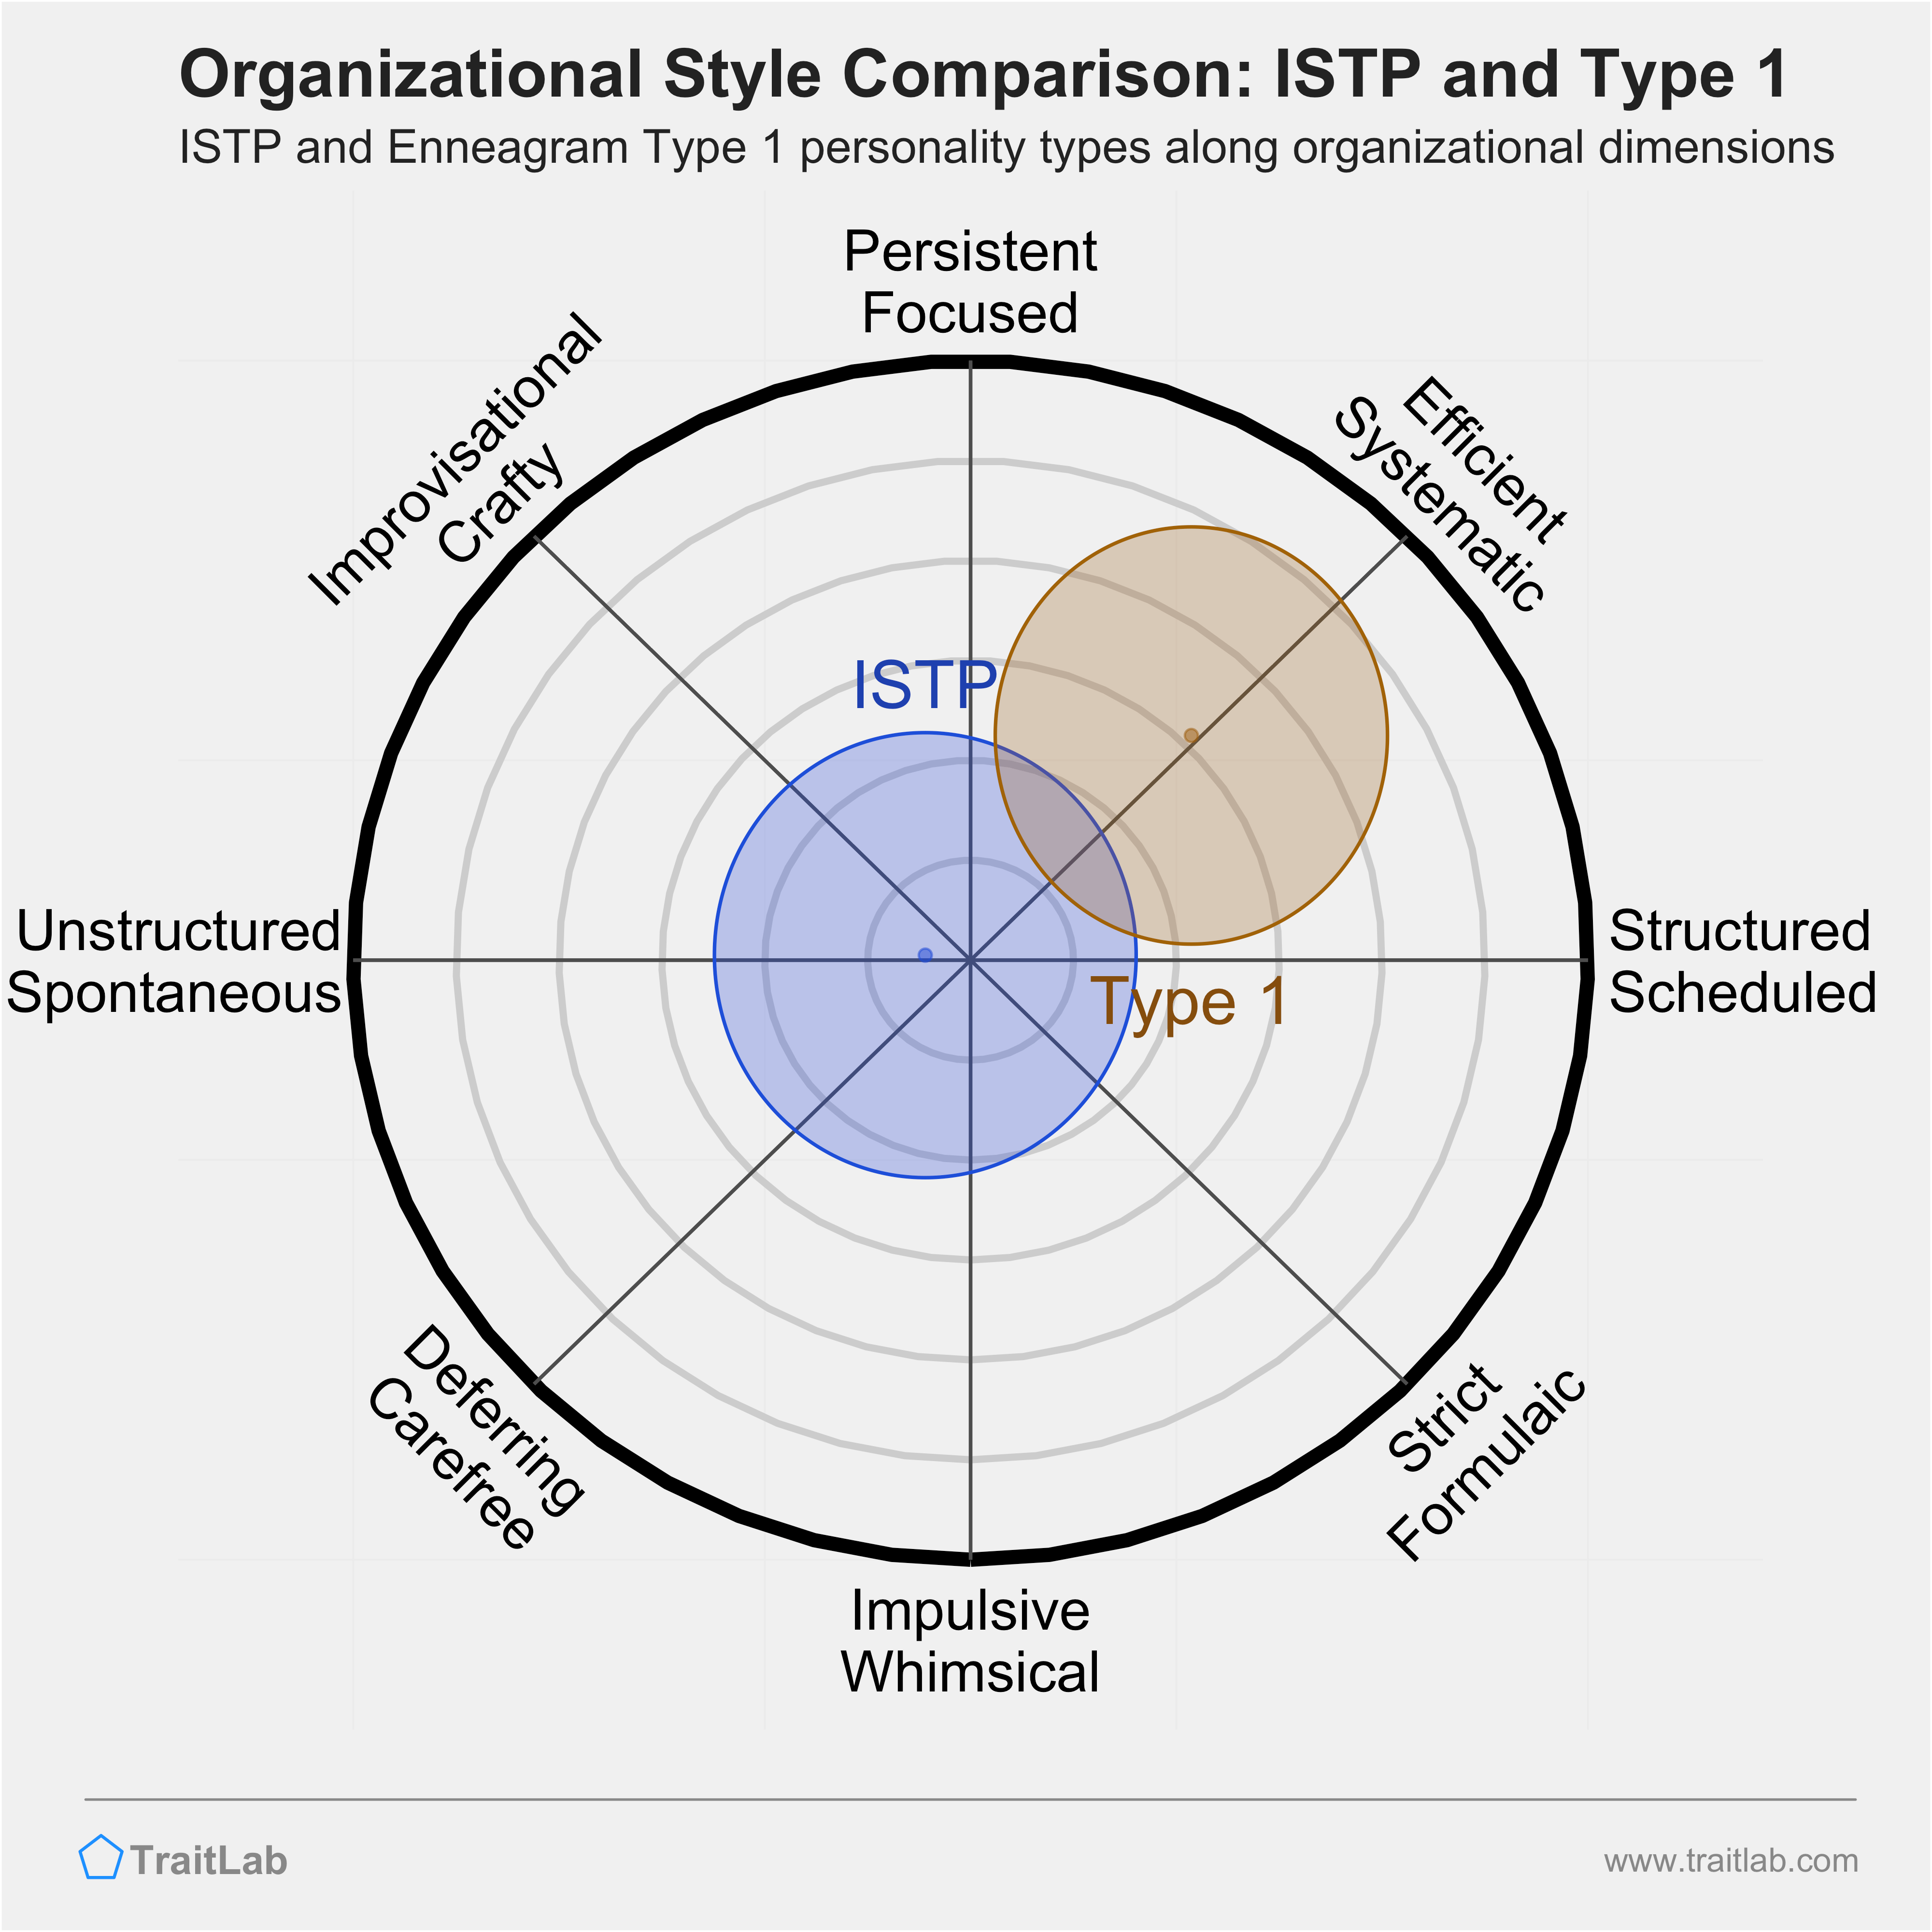 ISTP and Type 1 comparison across organizational dimensions